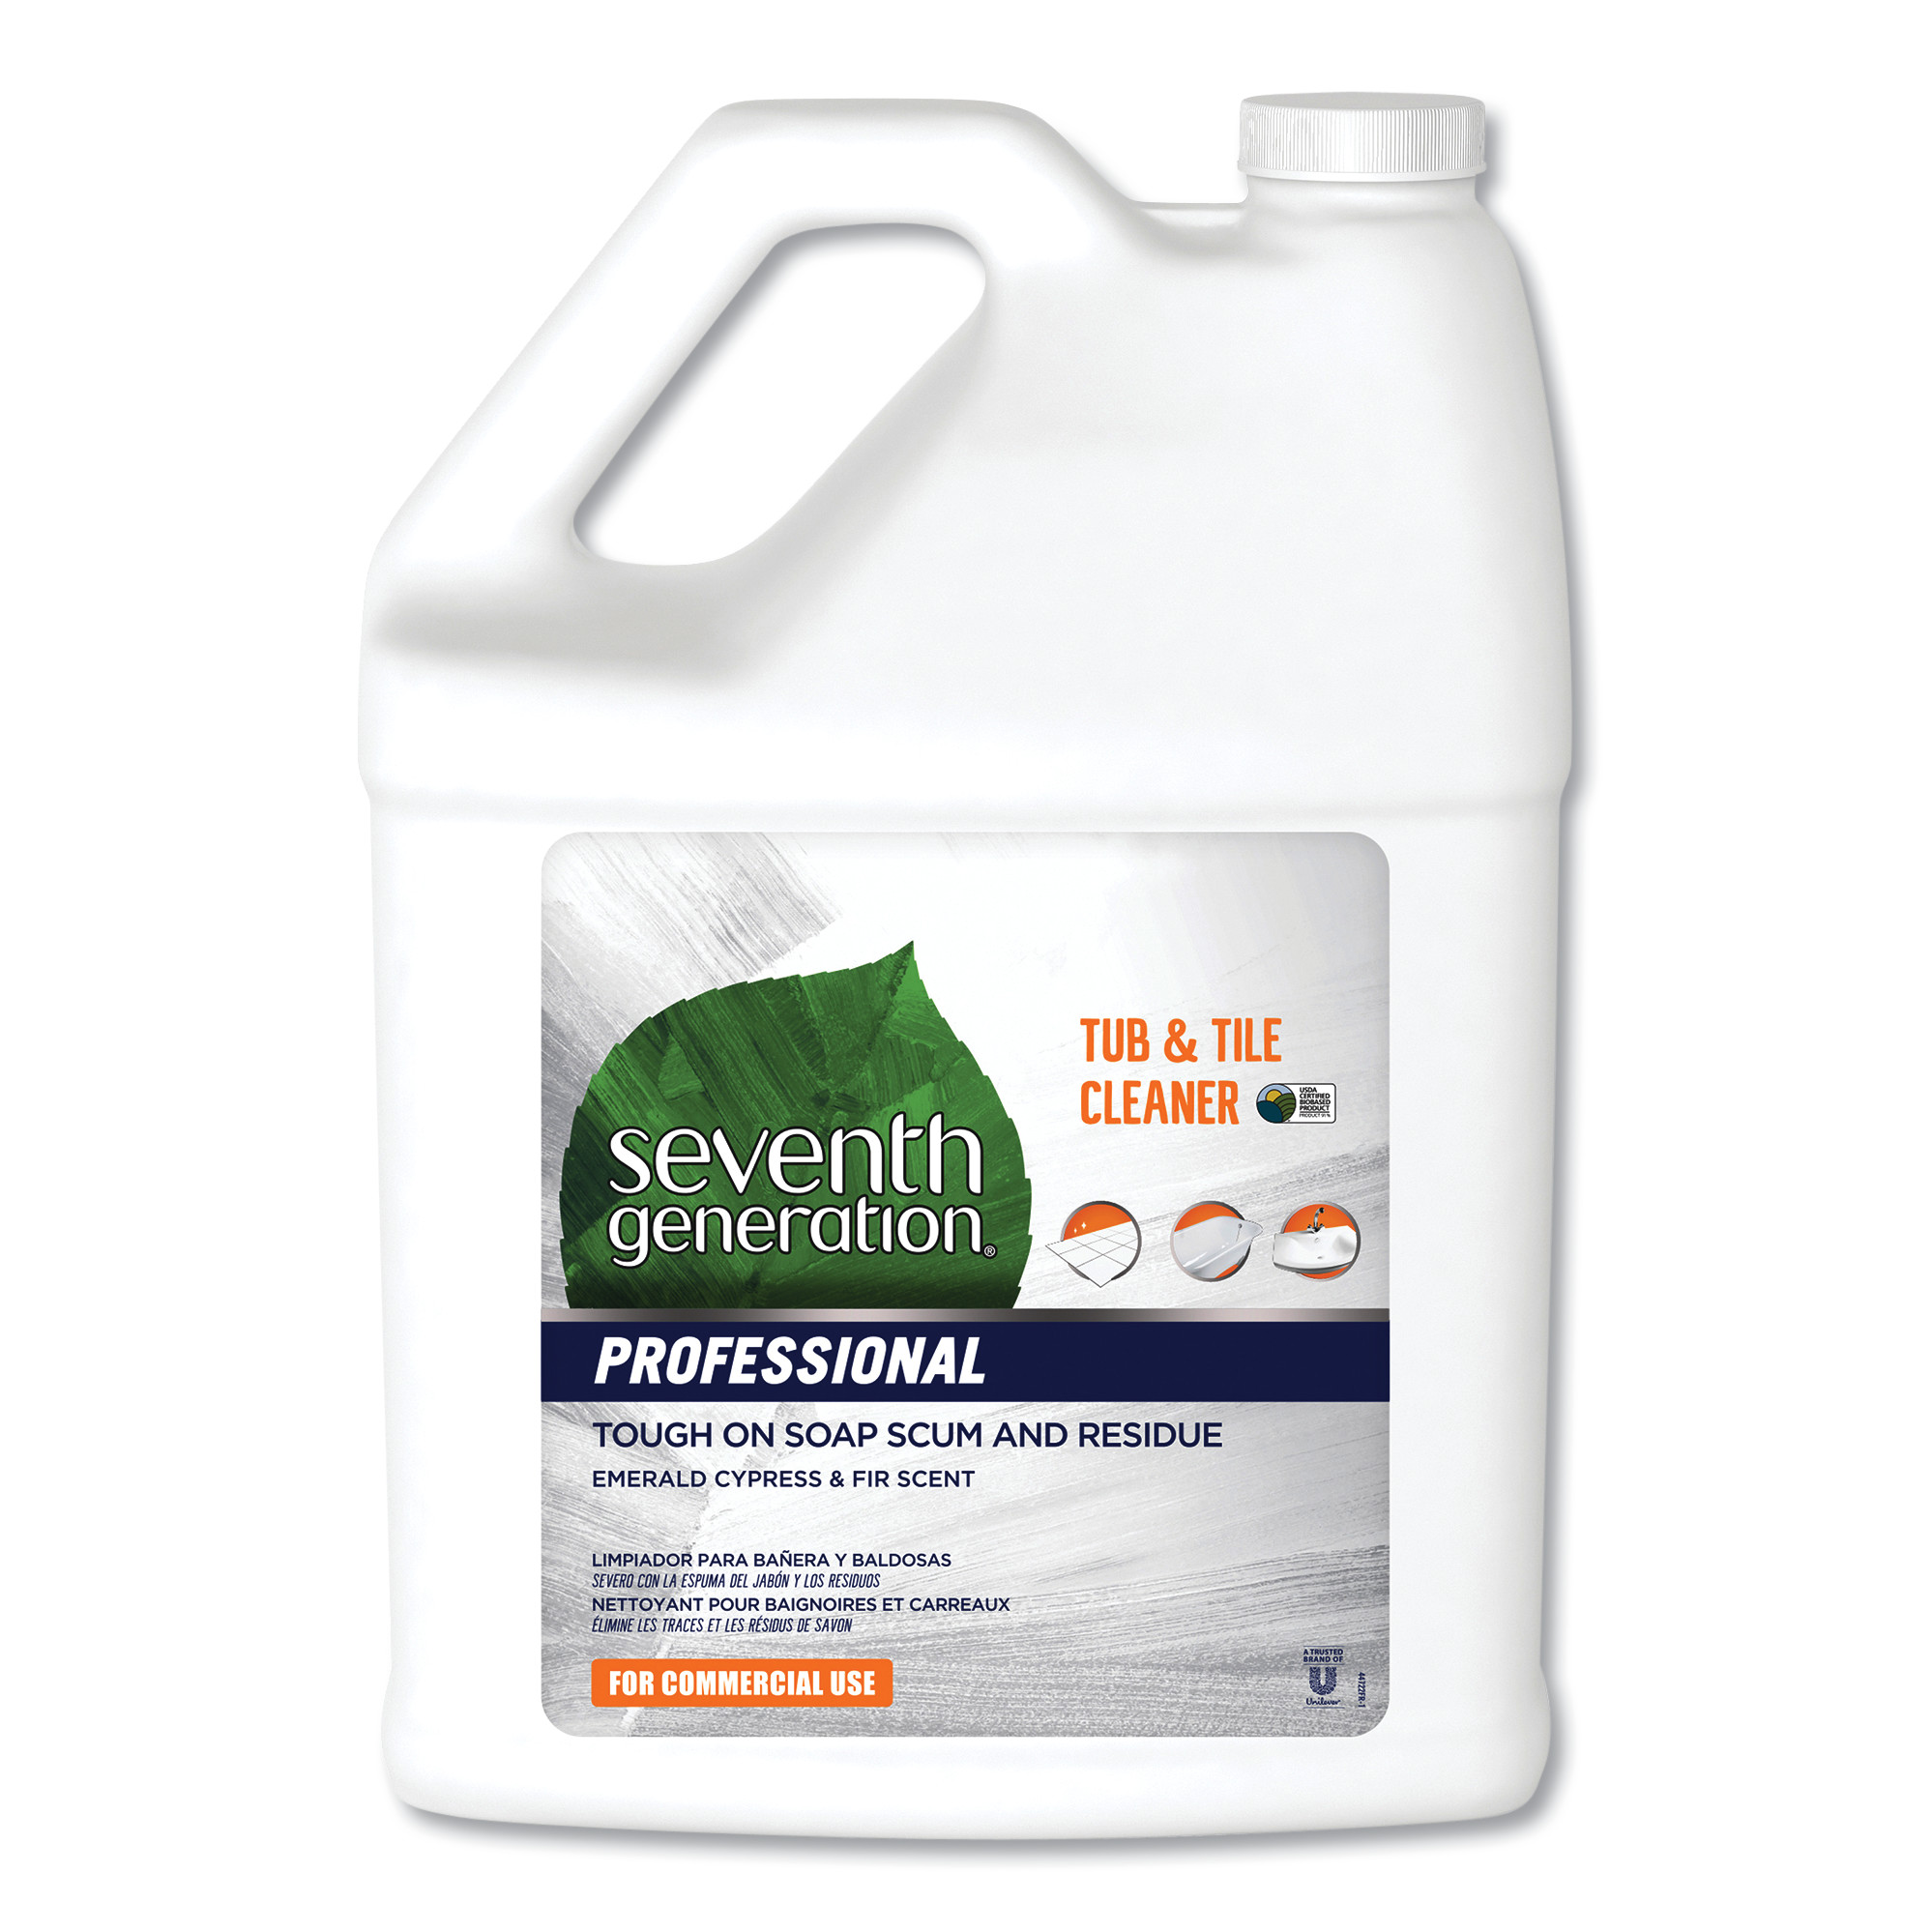  Seventh Generation Professional 44722CT Tub and Tile Cleaner, Emerald Cypress and Fir, 1 gal, 2/Carton (SEV44722CT) 